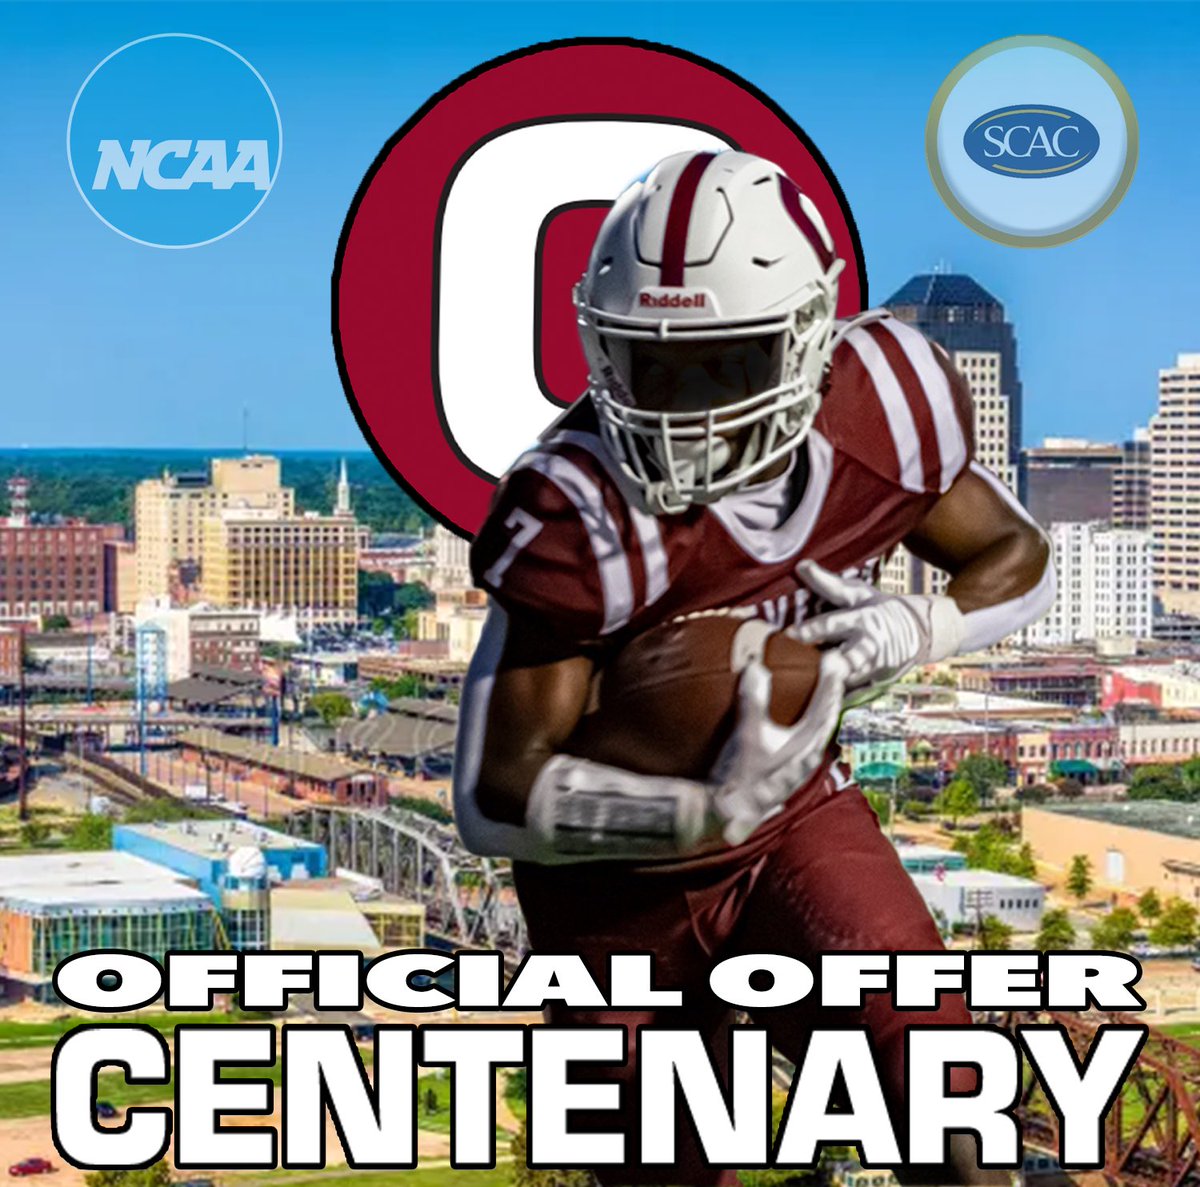 Blessed to receive an offer from Centenary! @CoachWudtee